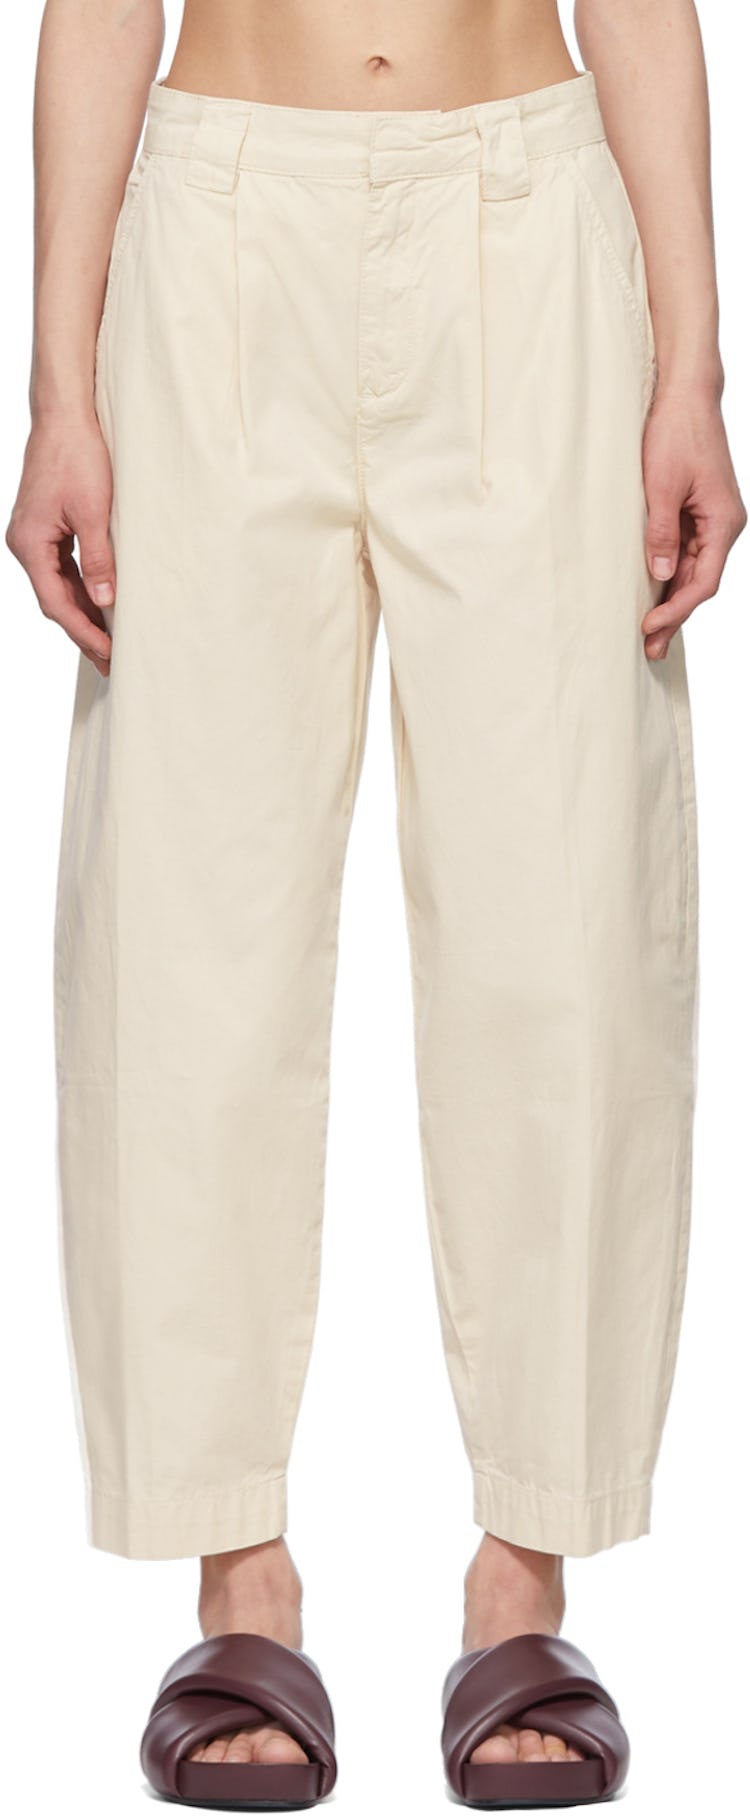 Off-White Cotton Trousers: image 1